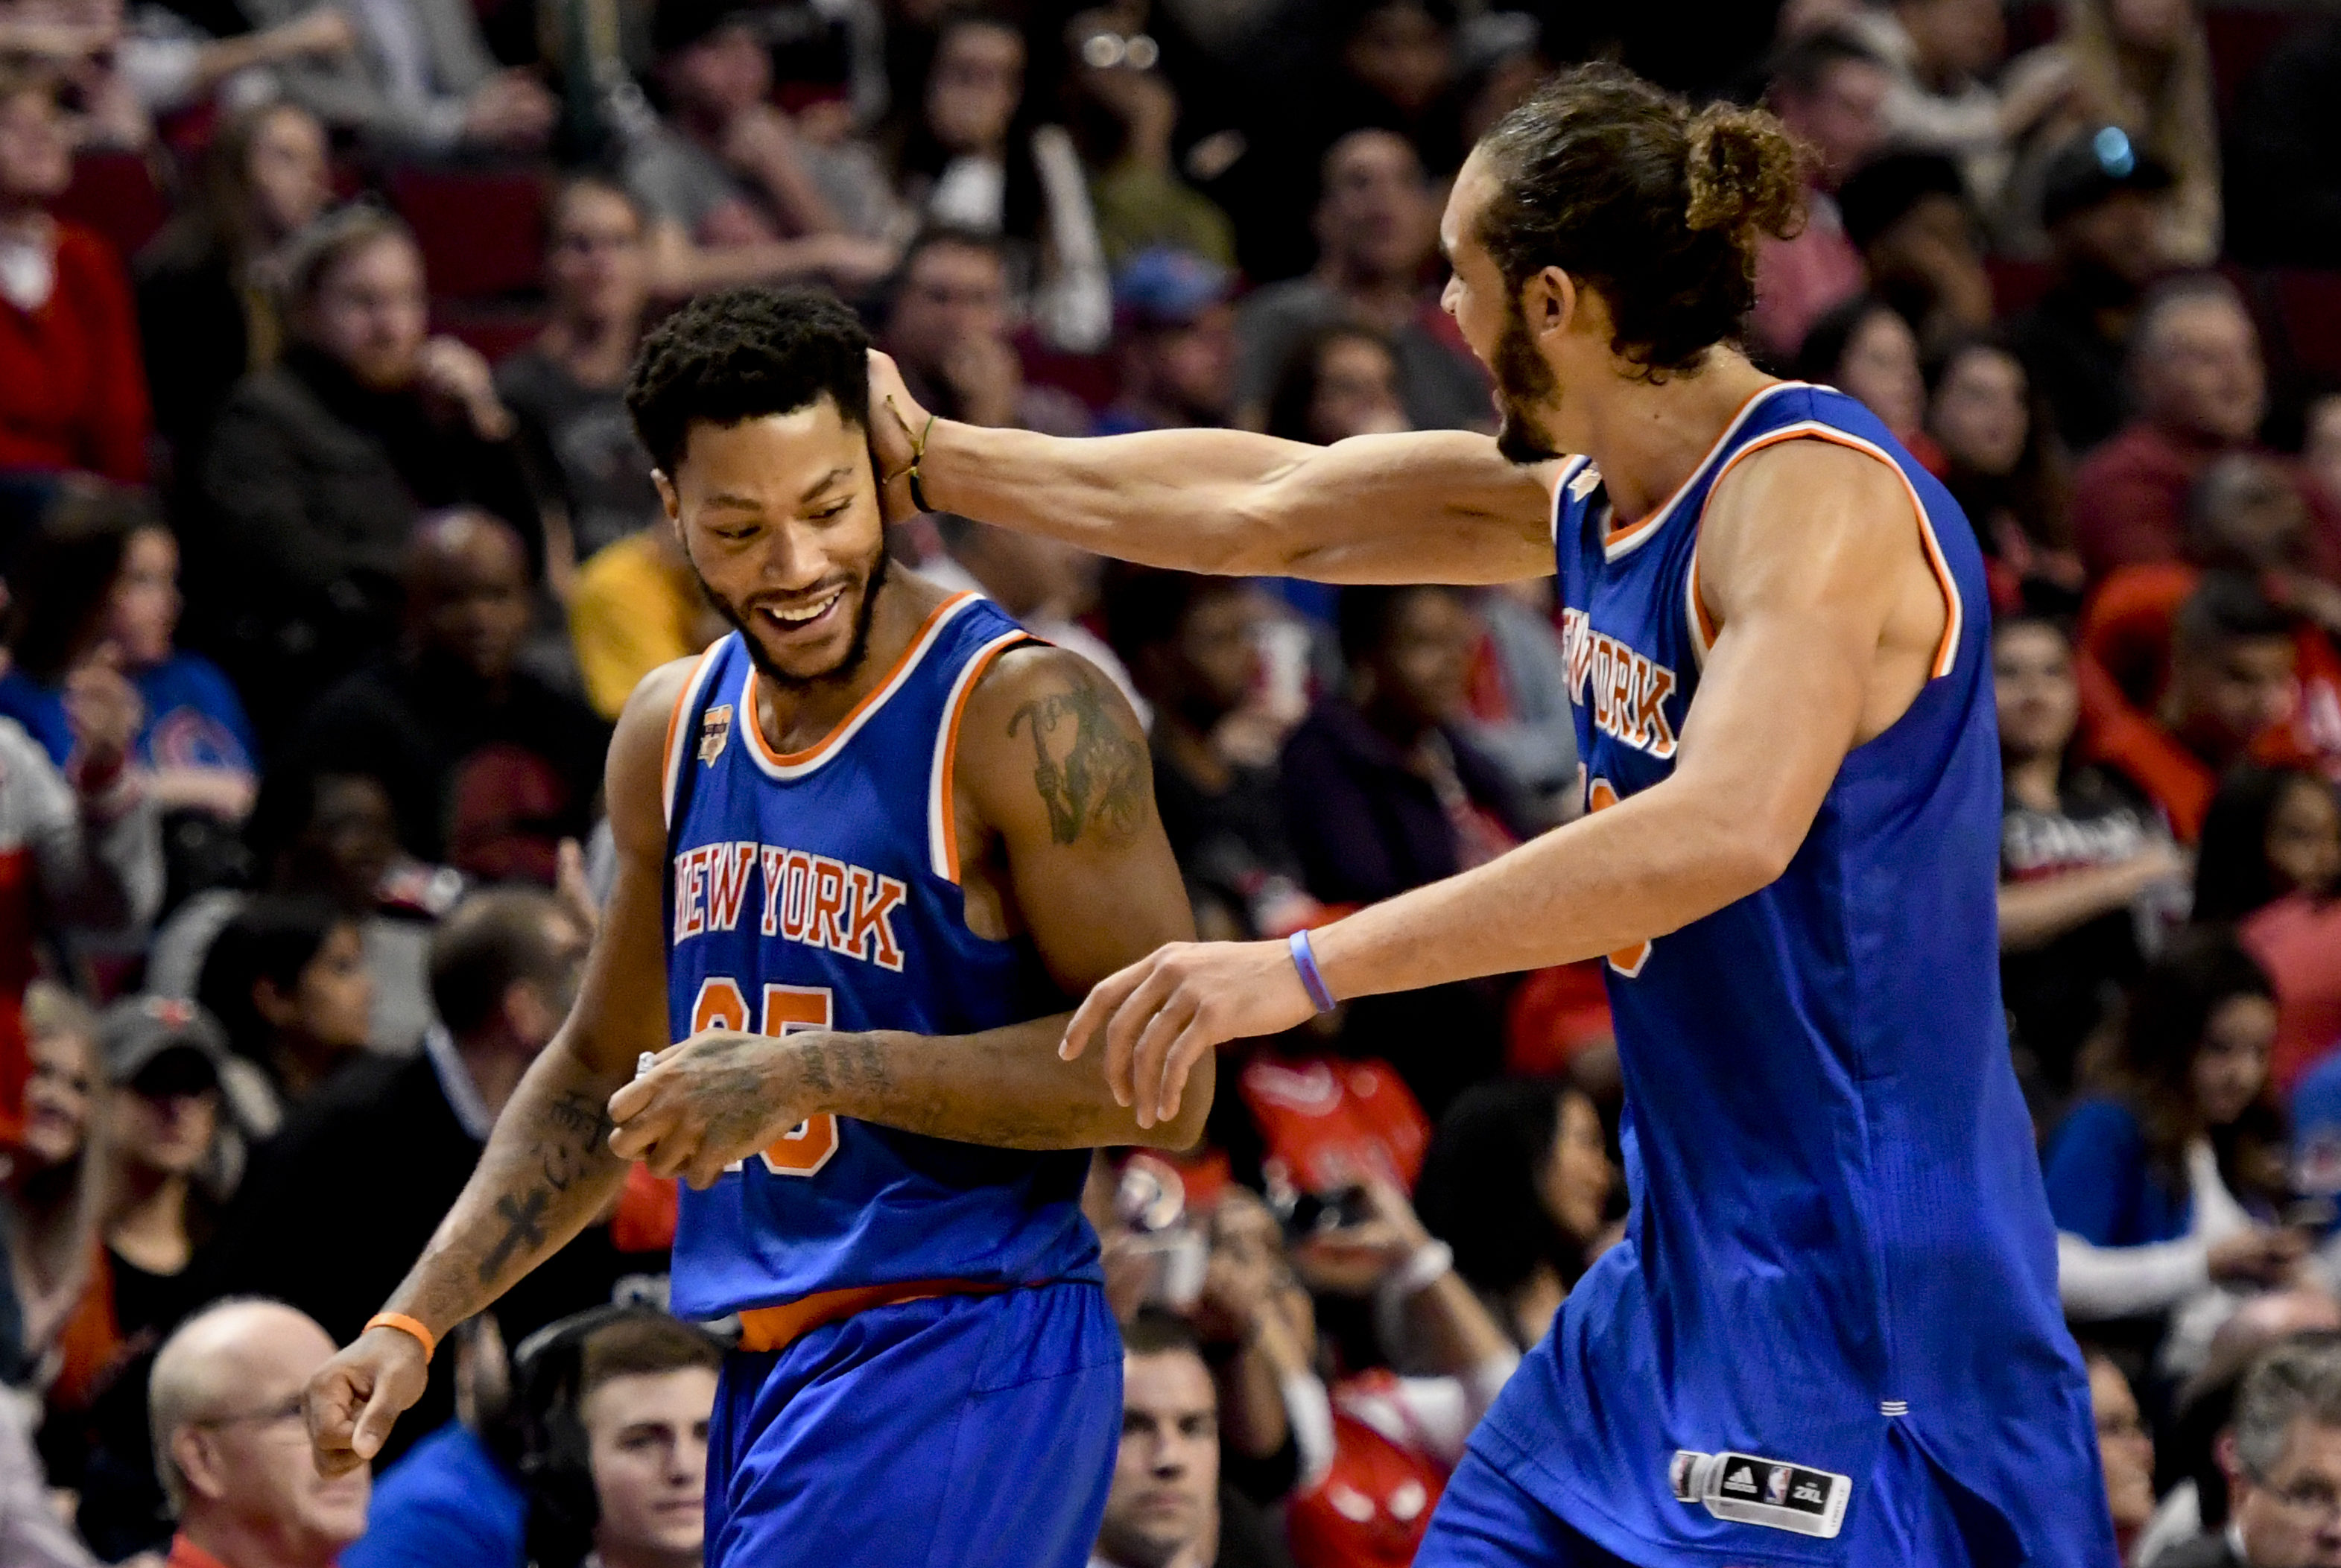 New York Knicks guard Derrick Rose (25) and New York Knicks center Joakim Noah (13) high-five in the fourth quarter of an NBA basketball game against the Chicago Bulls Friday, Nov. 4, 2016, in Chicago. The New York Knicks beat the Chicago Bulls 117-104. (AP Photo/Matt Marton)